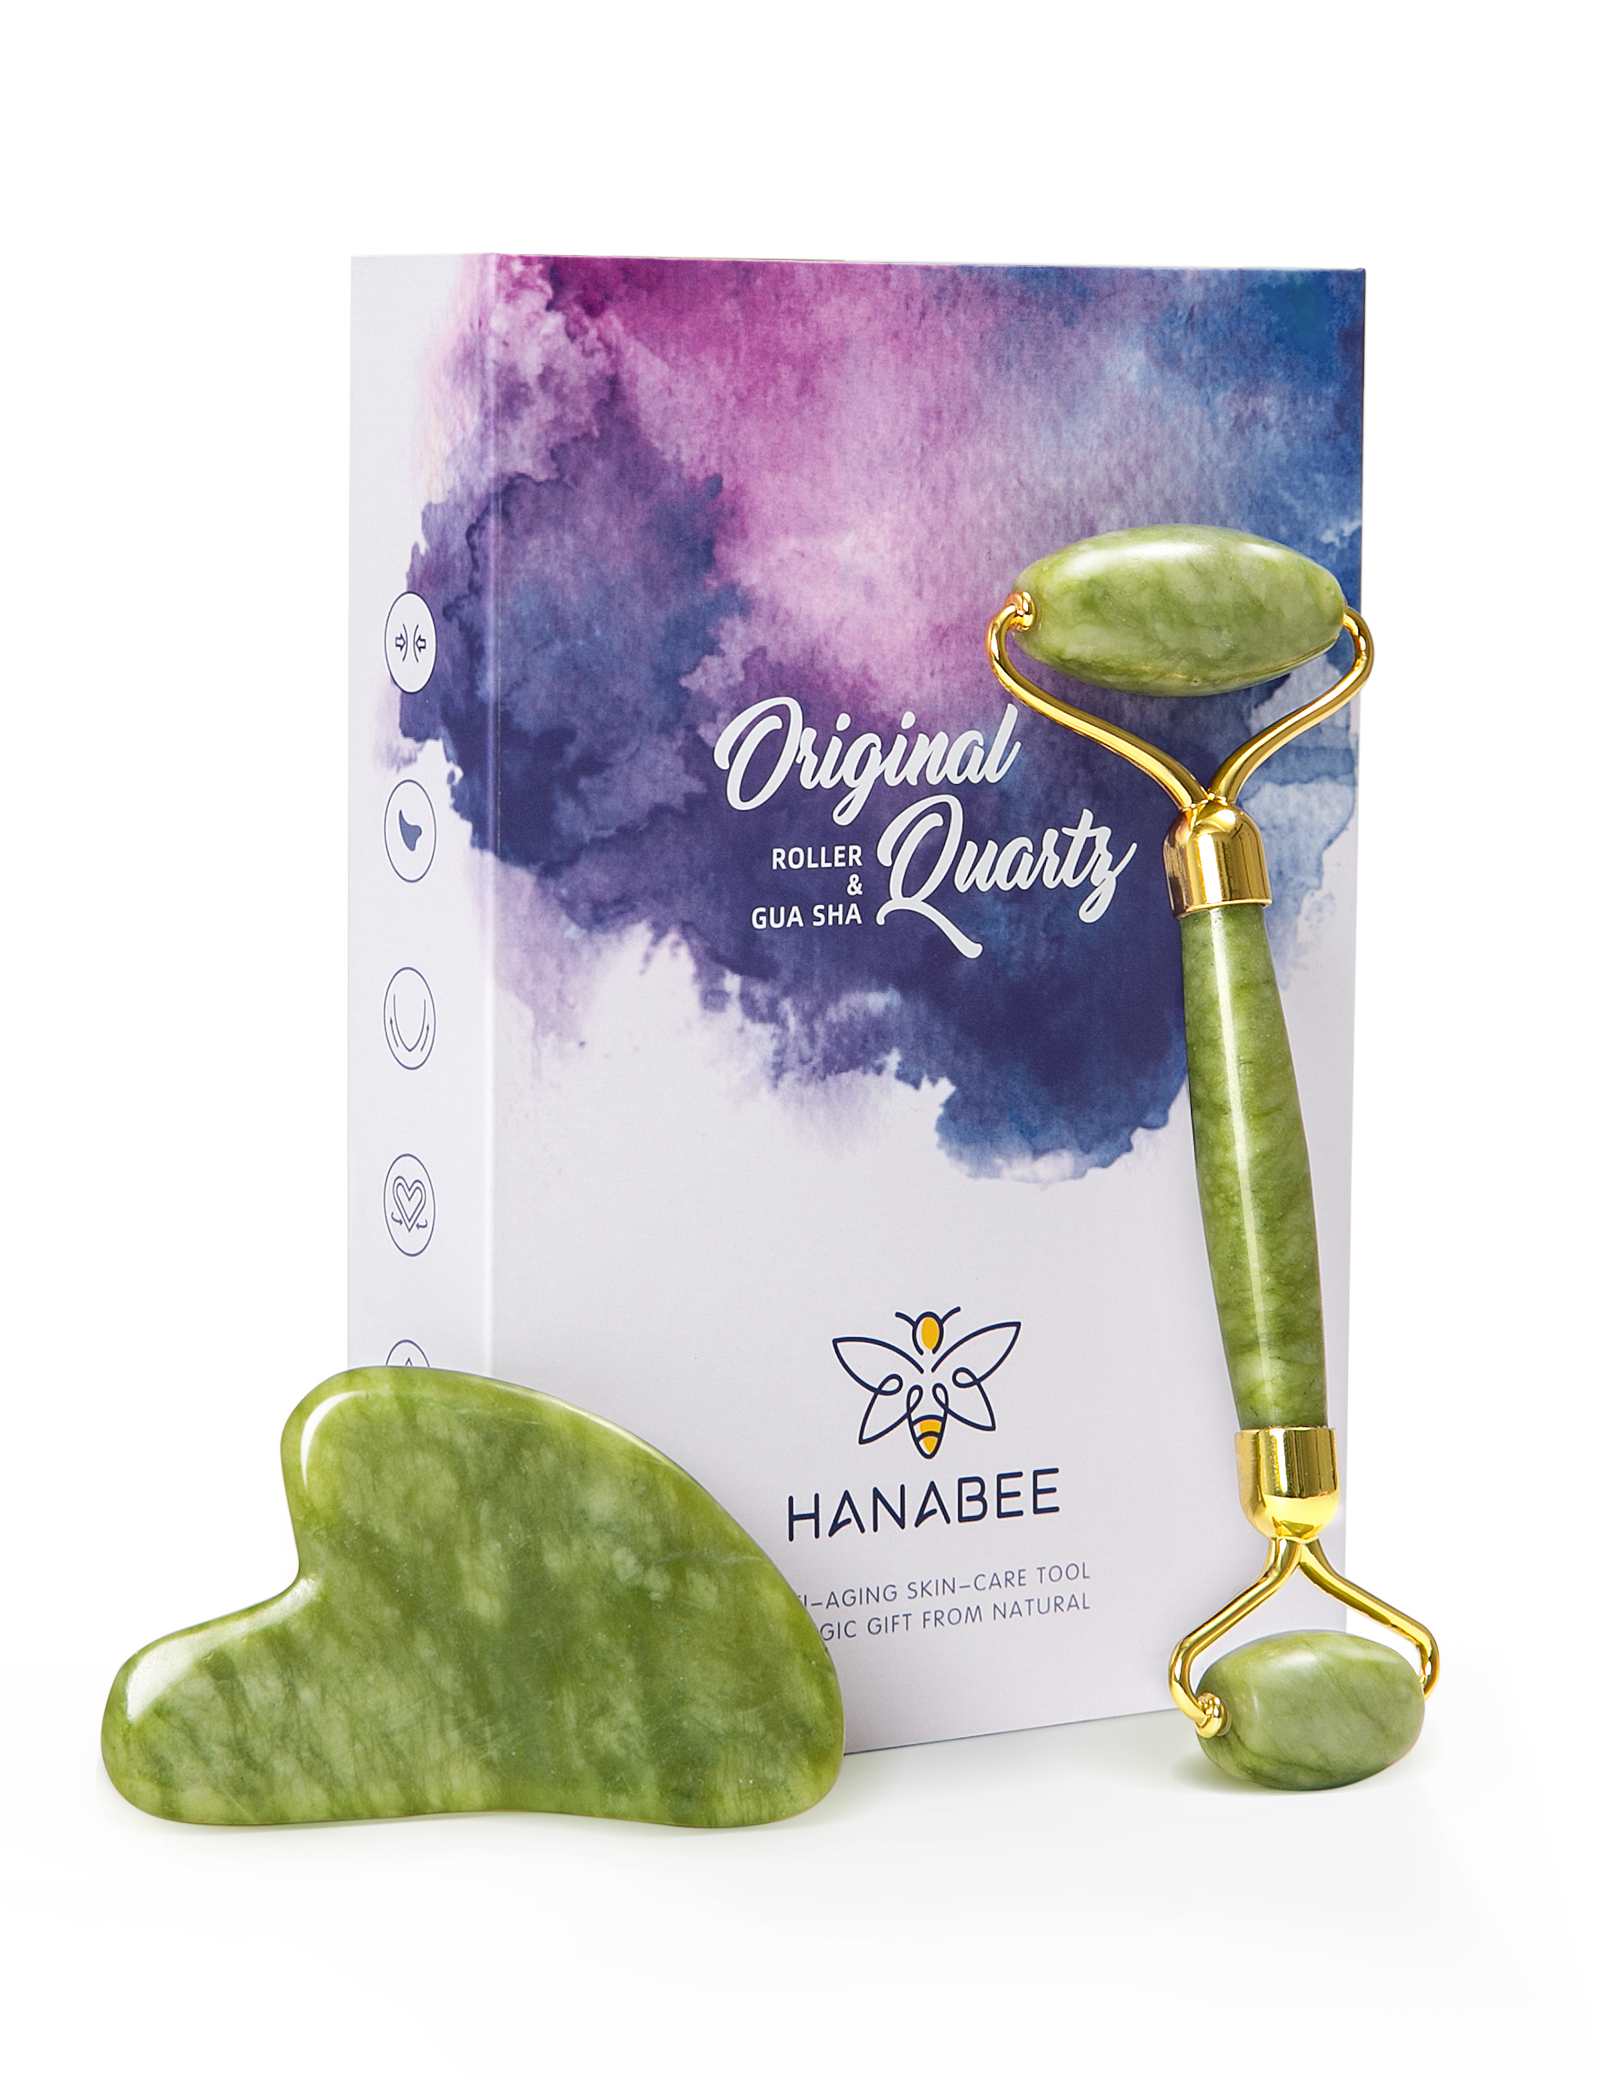 HANABEE Women Gua Sha Jade, Face Roller for Puffy Eyes, Facial Kit Gift - image 1 of 7